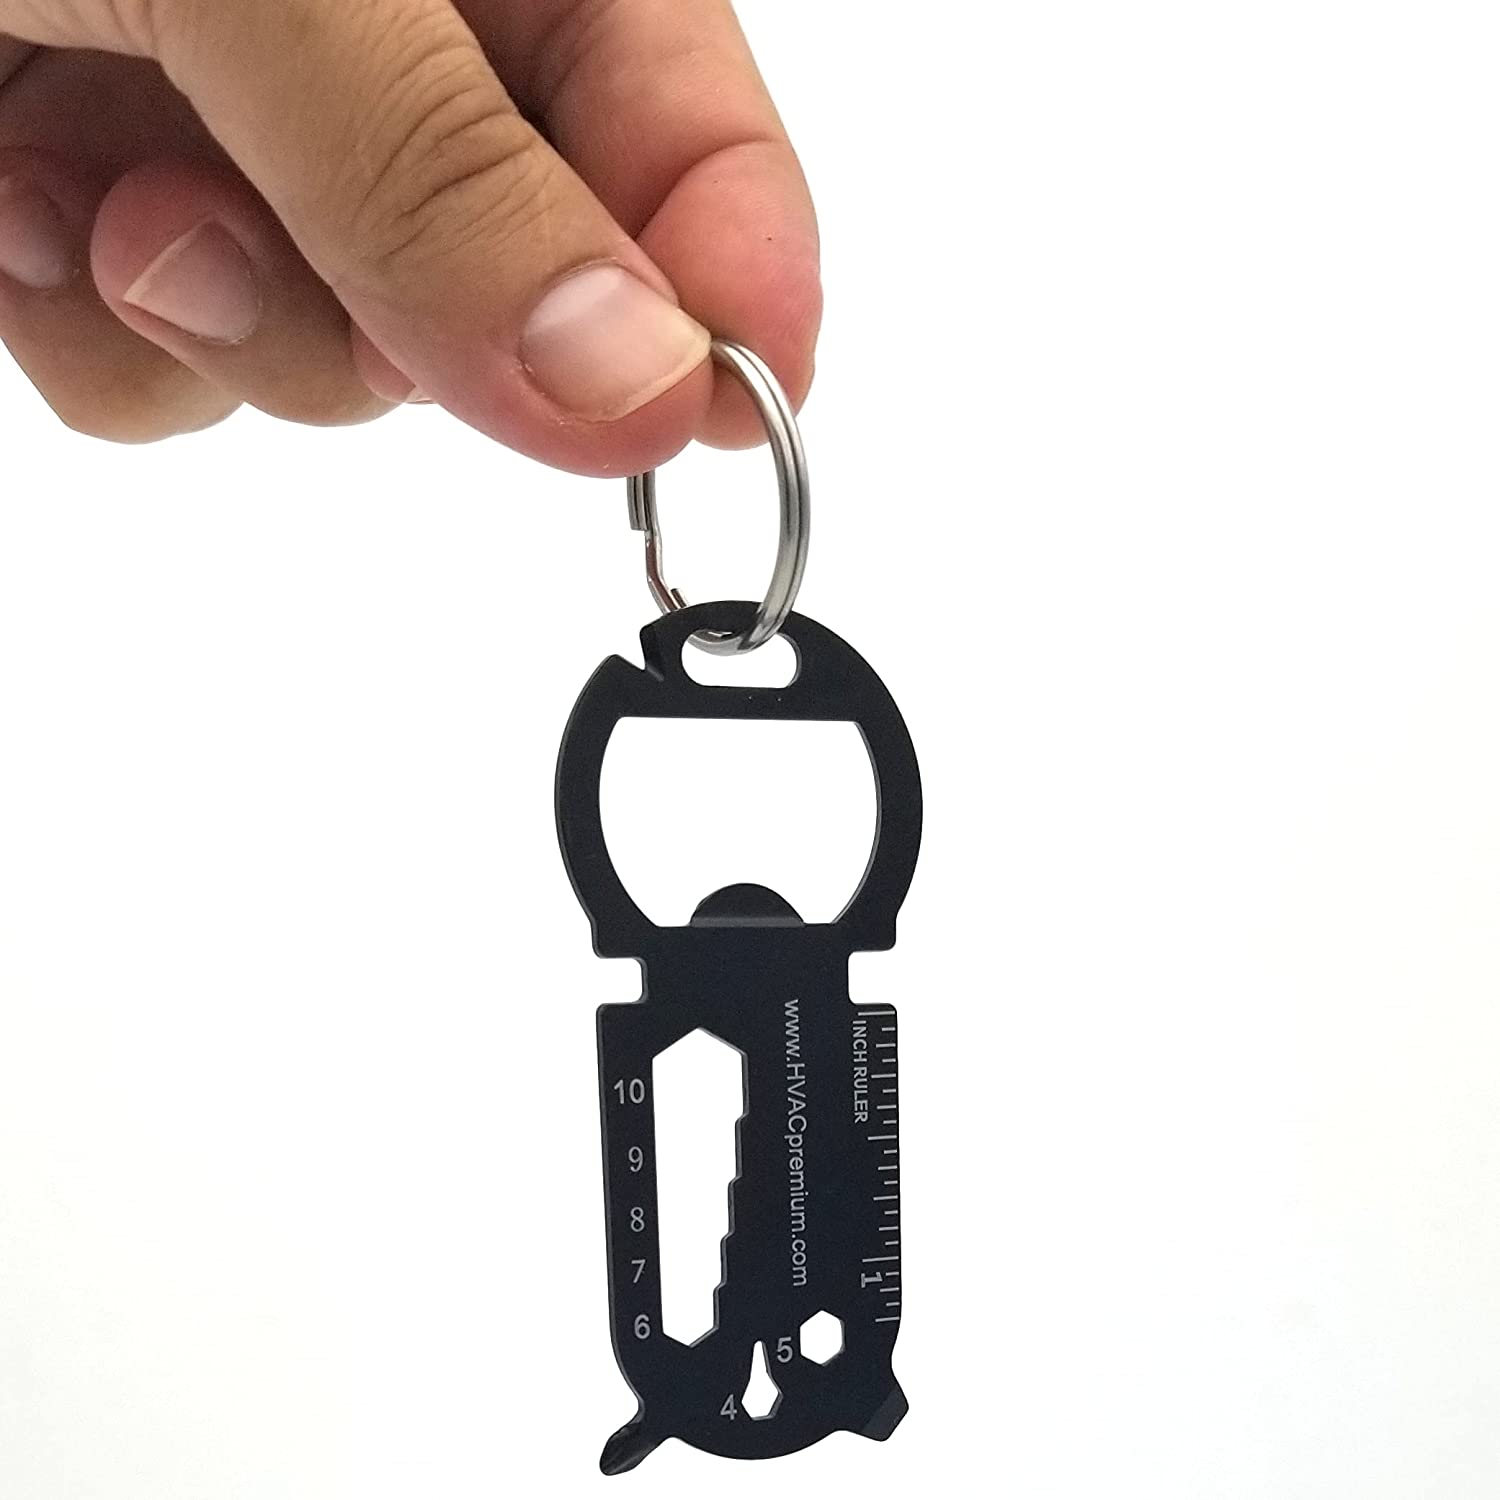 Multi-Function Keychain Multi-Tool Bottle Opener EDC Handy Accessory, Hex Tool (7 Sizes) , Screwdriver, Wrench, Bike Spoke/Wire Bender, Imperial Ruler, Crow Bar